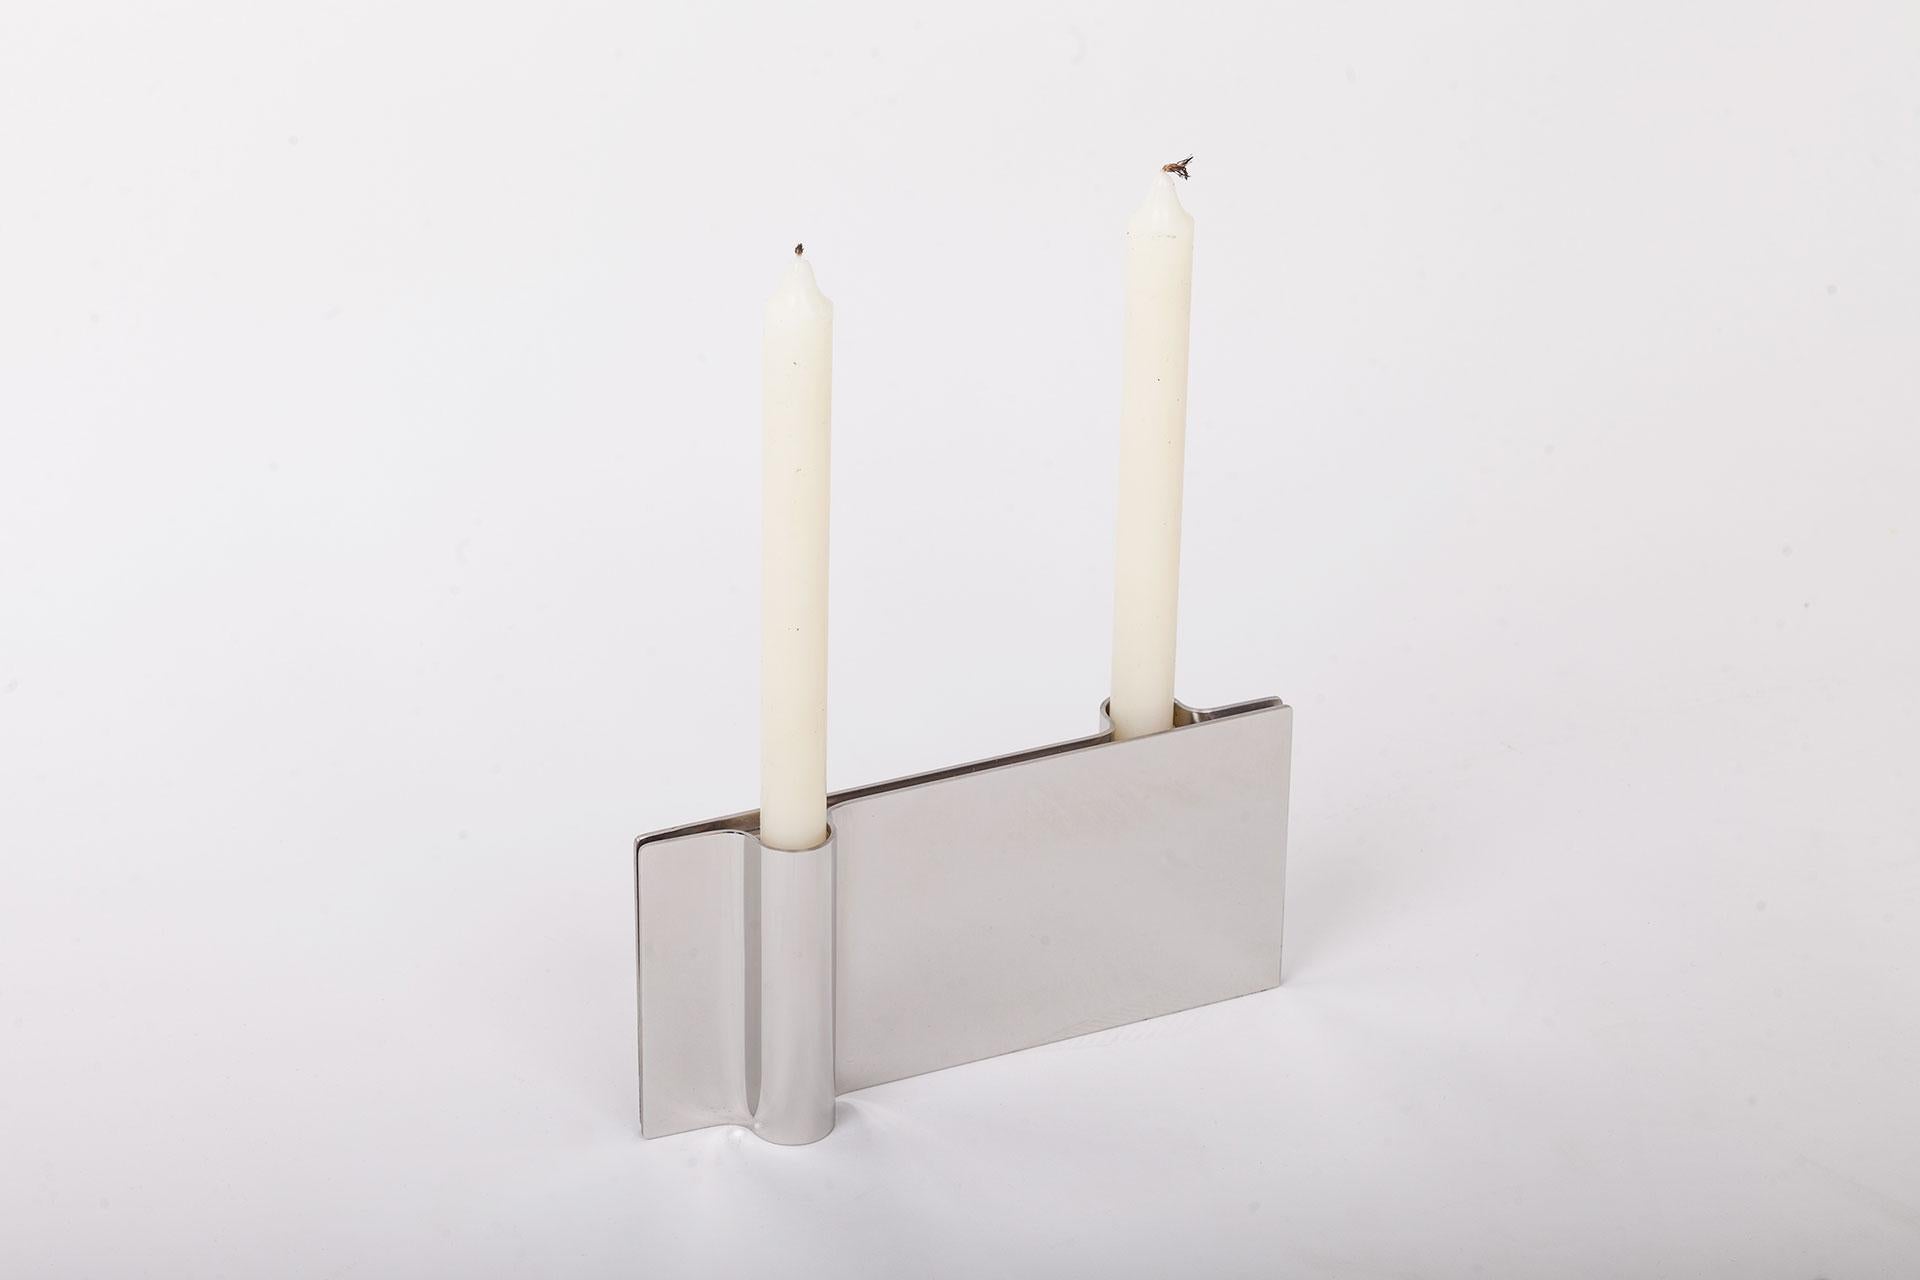 Folio steel candle holder by Mingardo
Dimensions: D22.5 x W2.2 x H11 cm 
Materials: Polished natural stainless steel
Weight: 1.5 kg

Also available in Different finishes: Polished natural copper, Polished natural brass, Polished natural